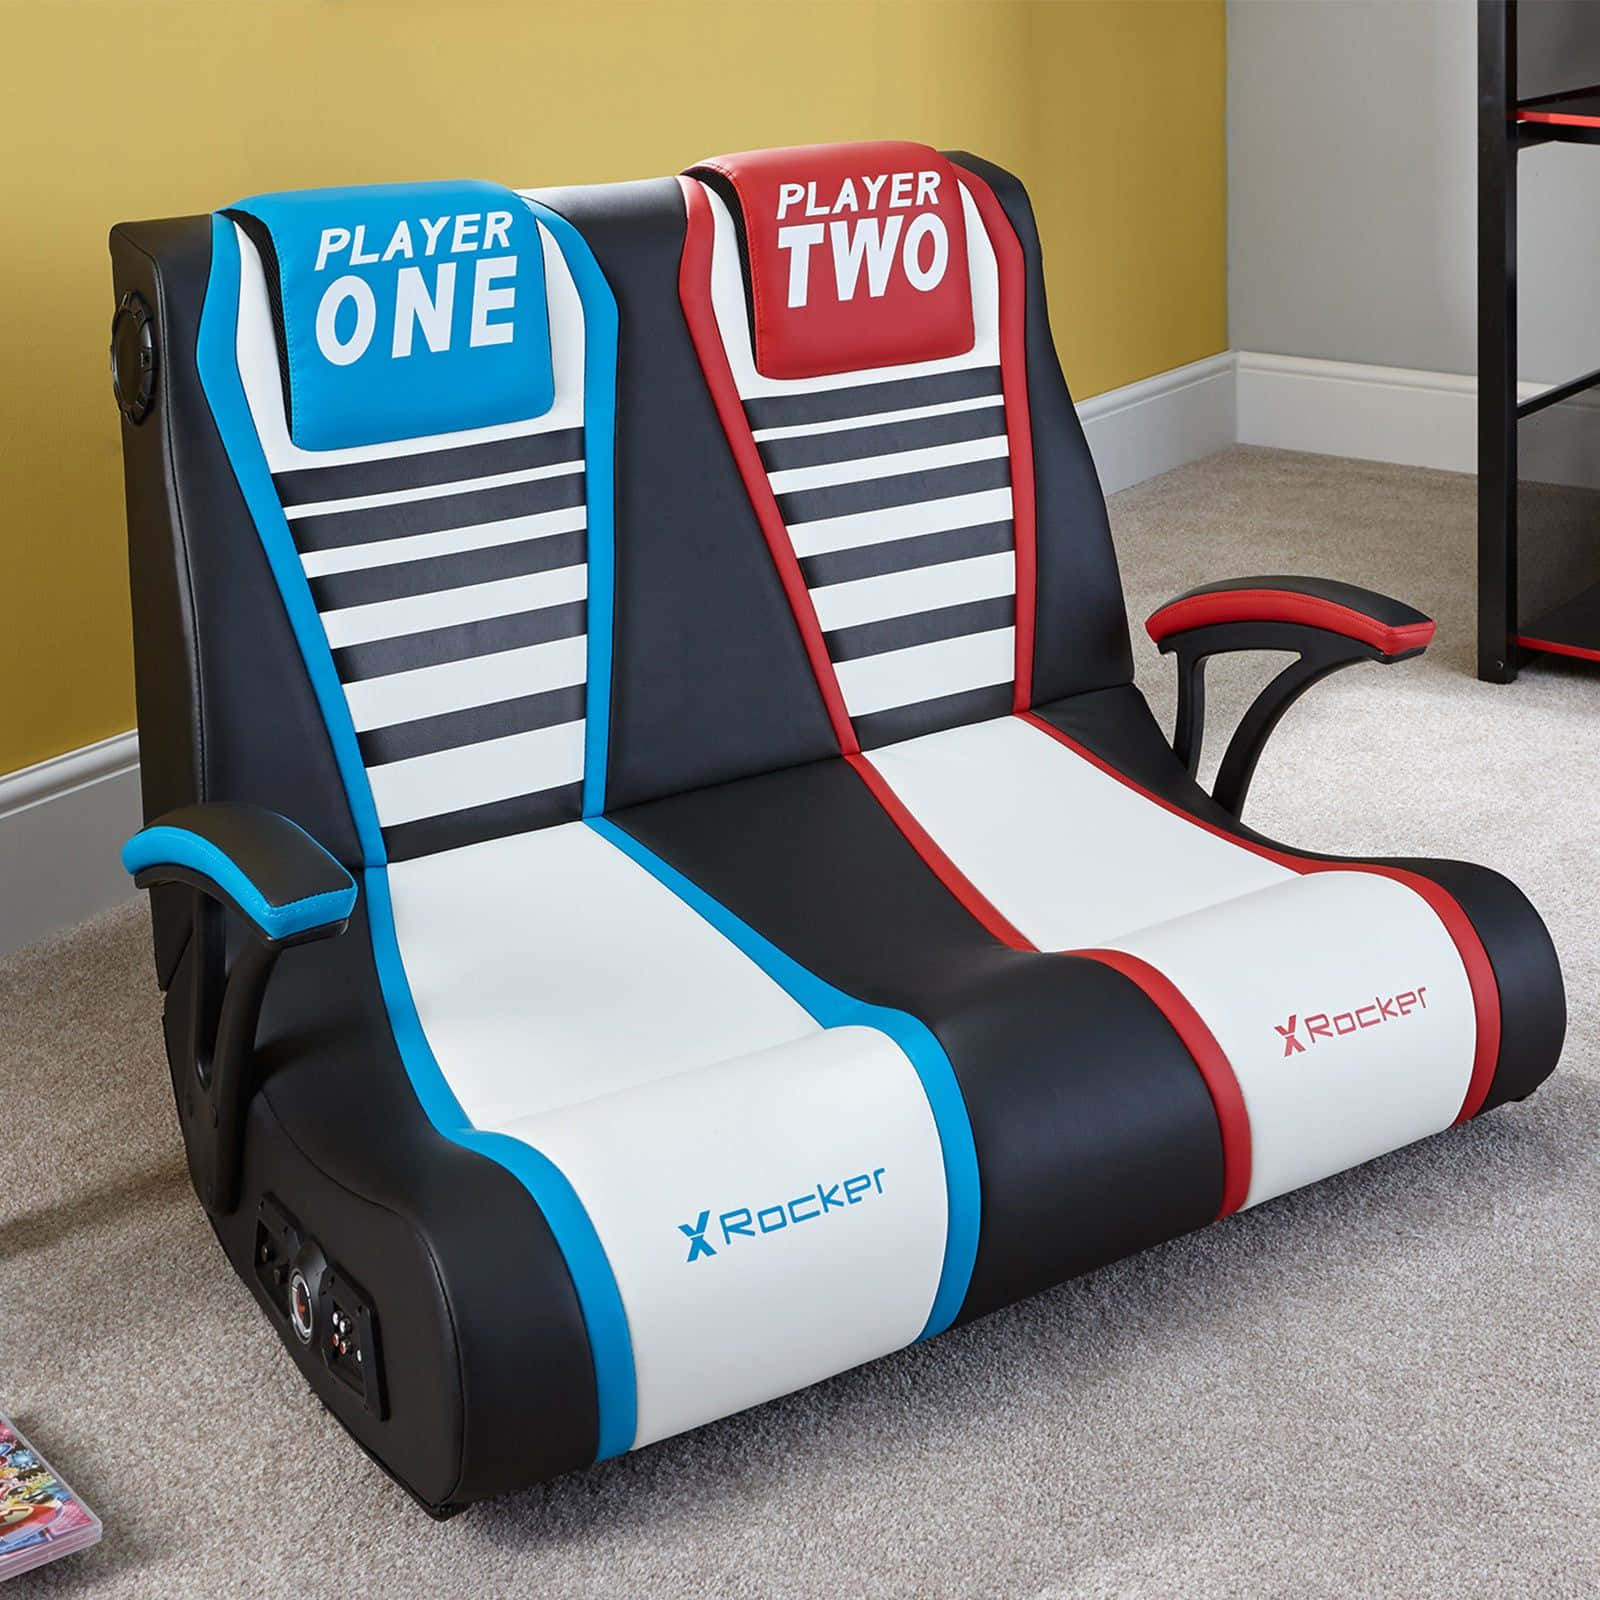 Enjoy a comfortable gaming experience with a quality gaming chair. Wallpaper